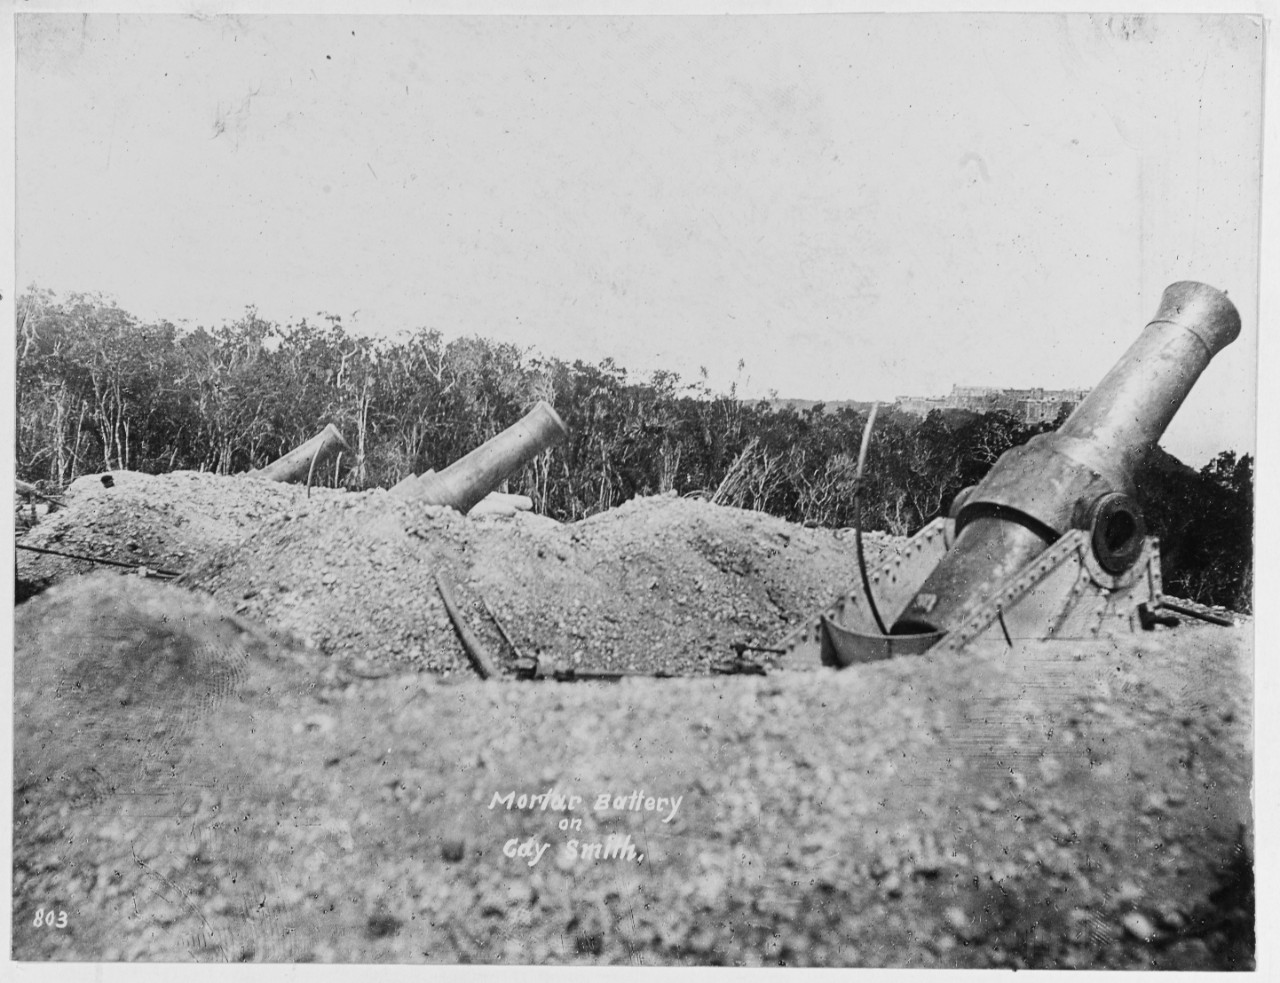 Mortar Battery on Cady Smith, during Spanish-American War, 1898. 